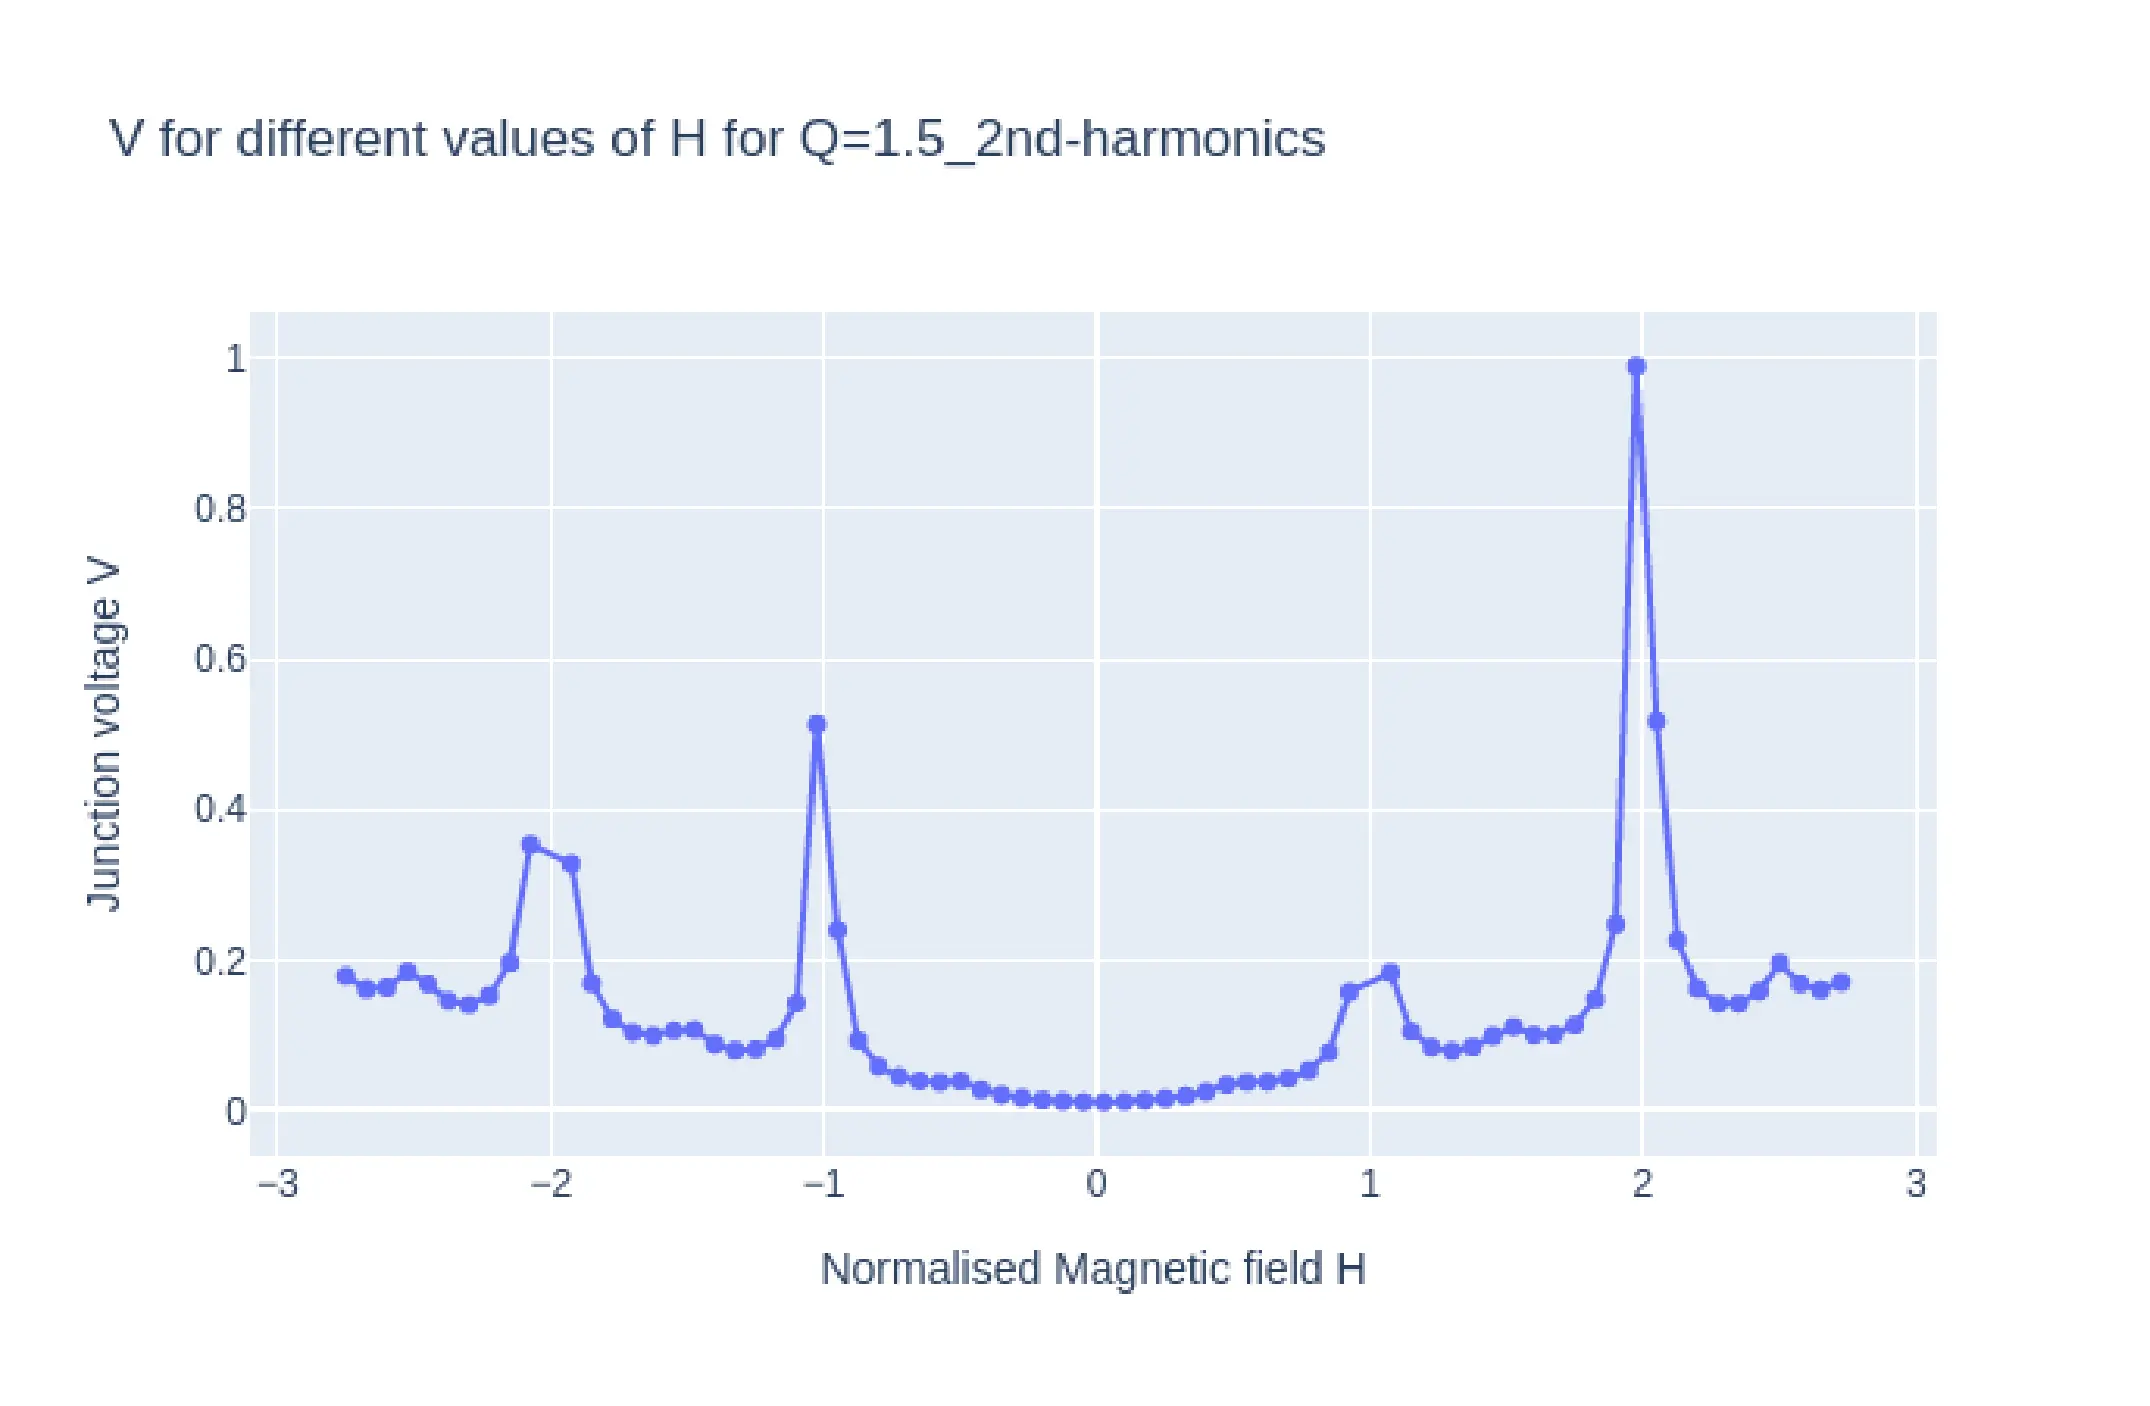 Plots of VH from simulation with parameter Q=1.5 and y-axis not log normalised